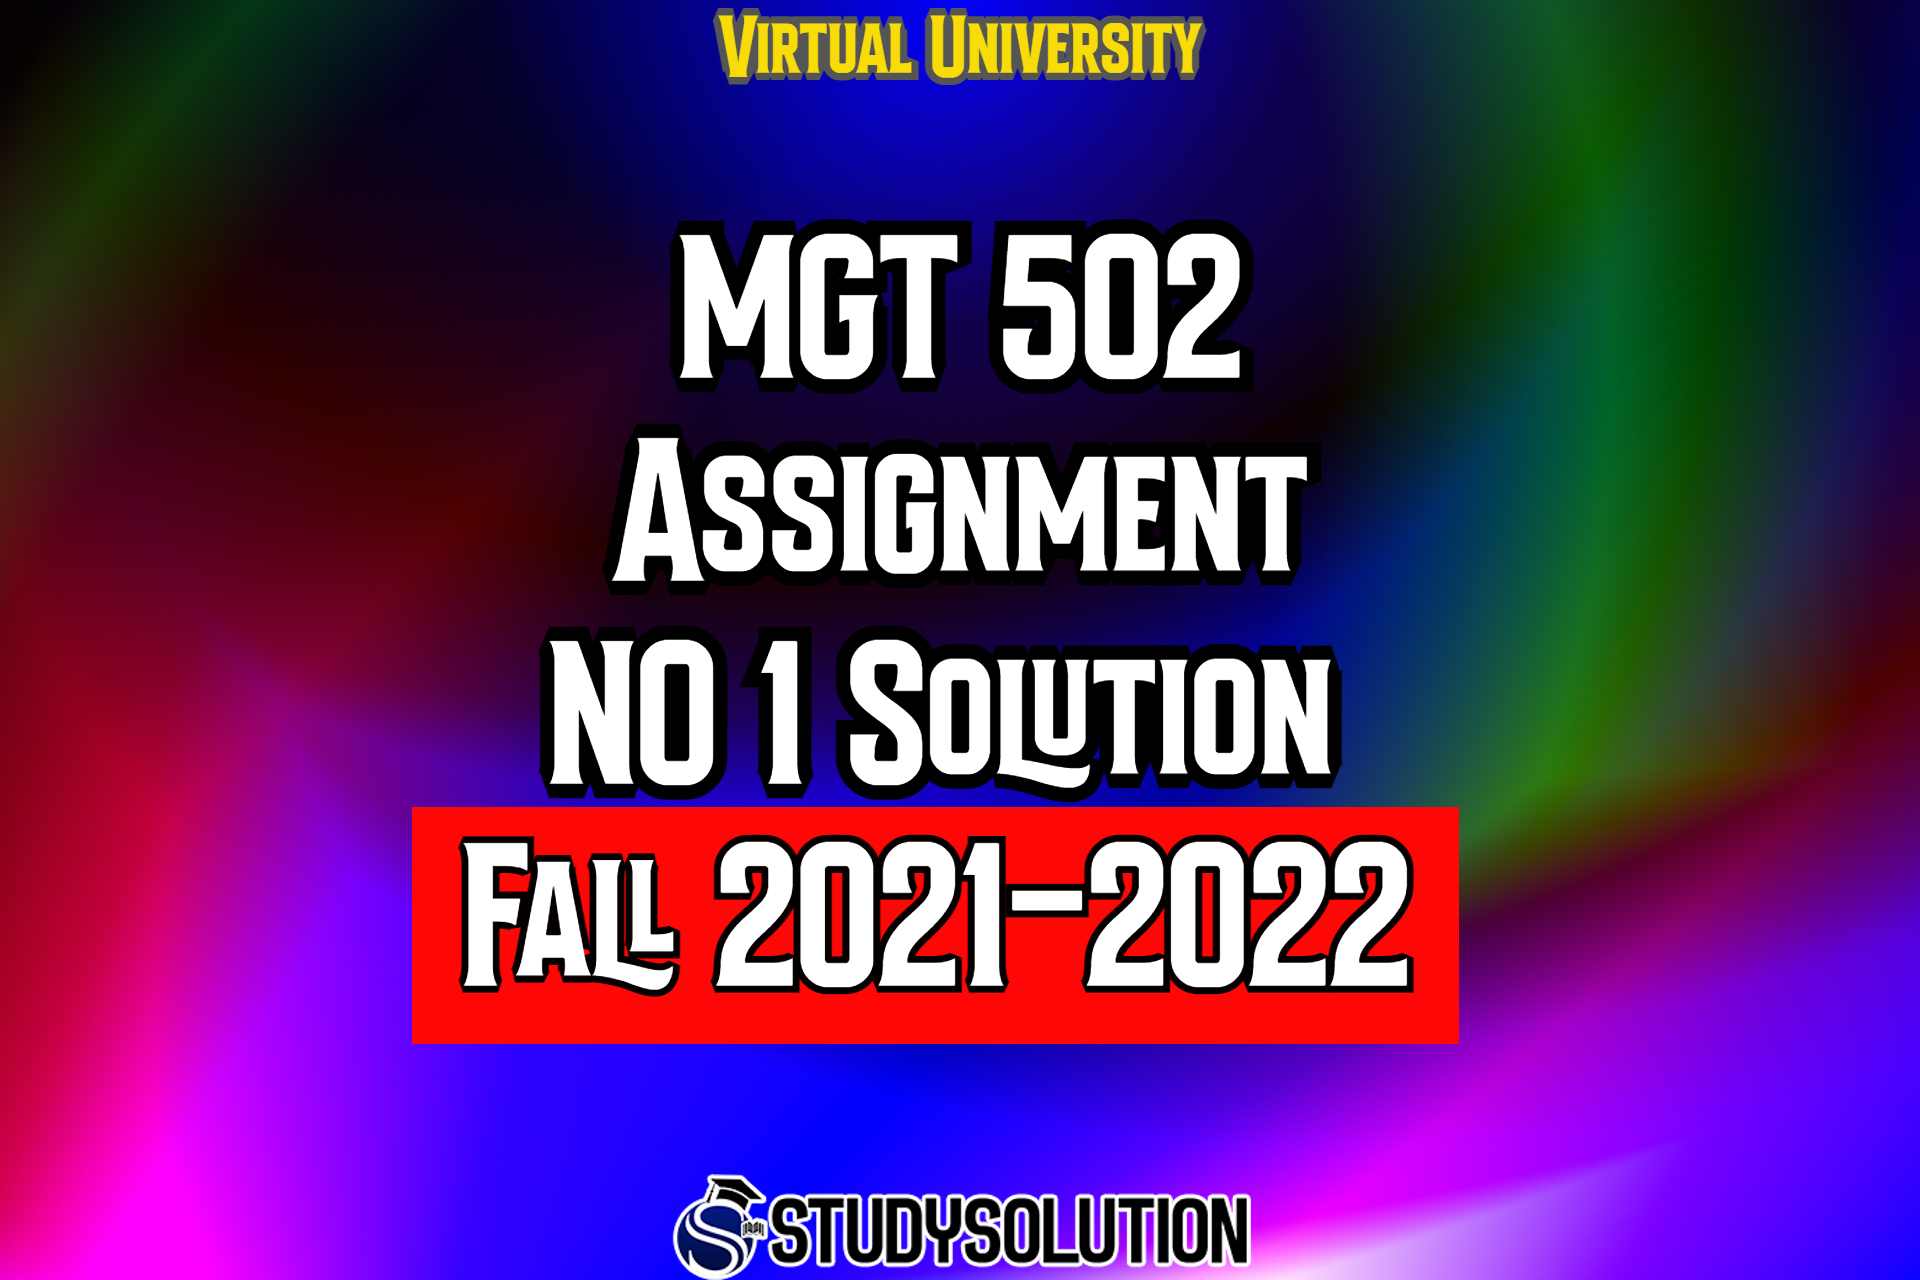 MGT502 Assignment No 1 Solution Fall 2022